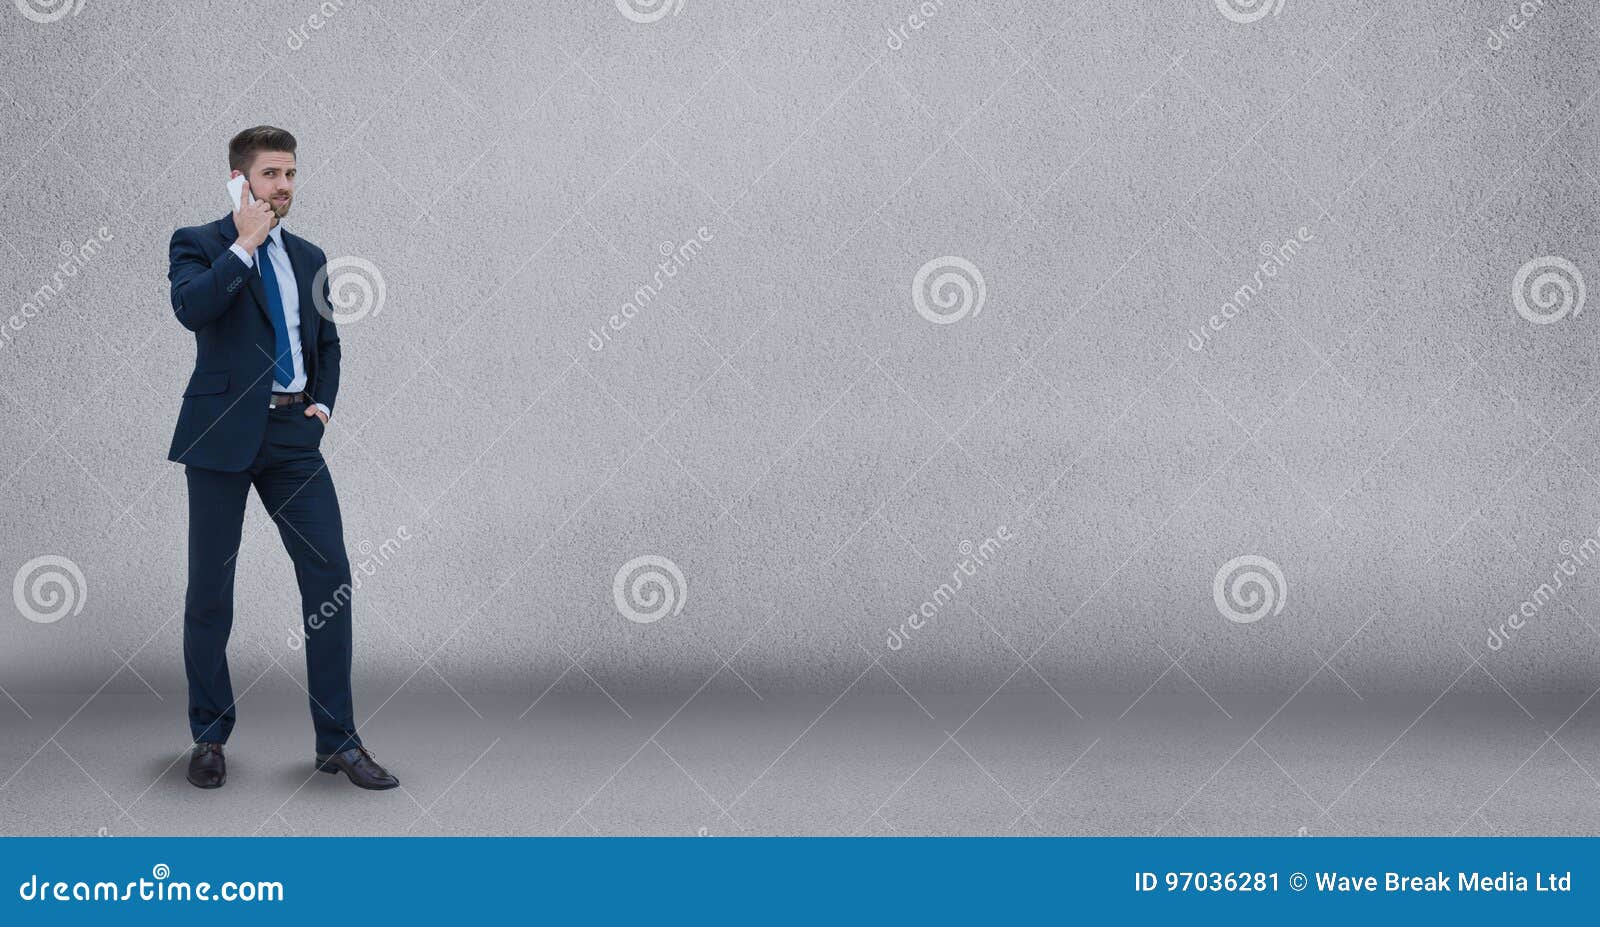 Business Man Talking on the Phone Against Grey Wall Background Stock ...